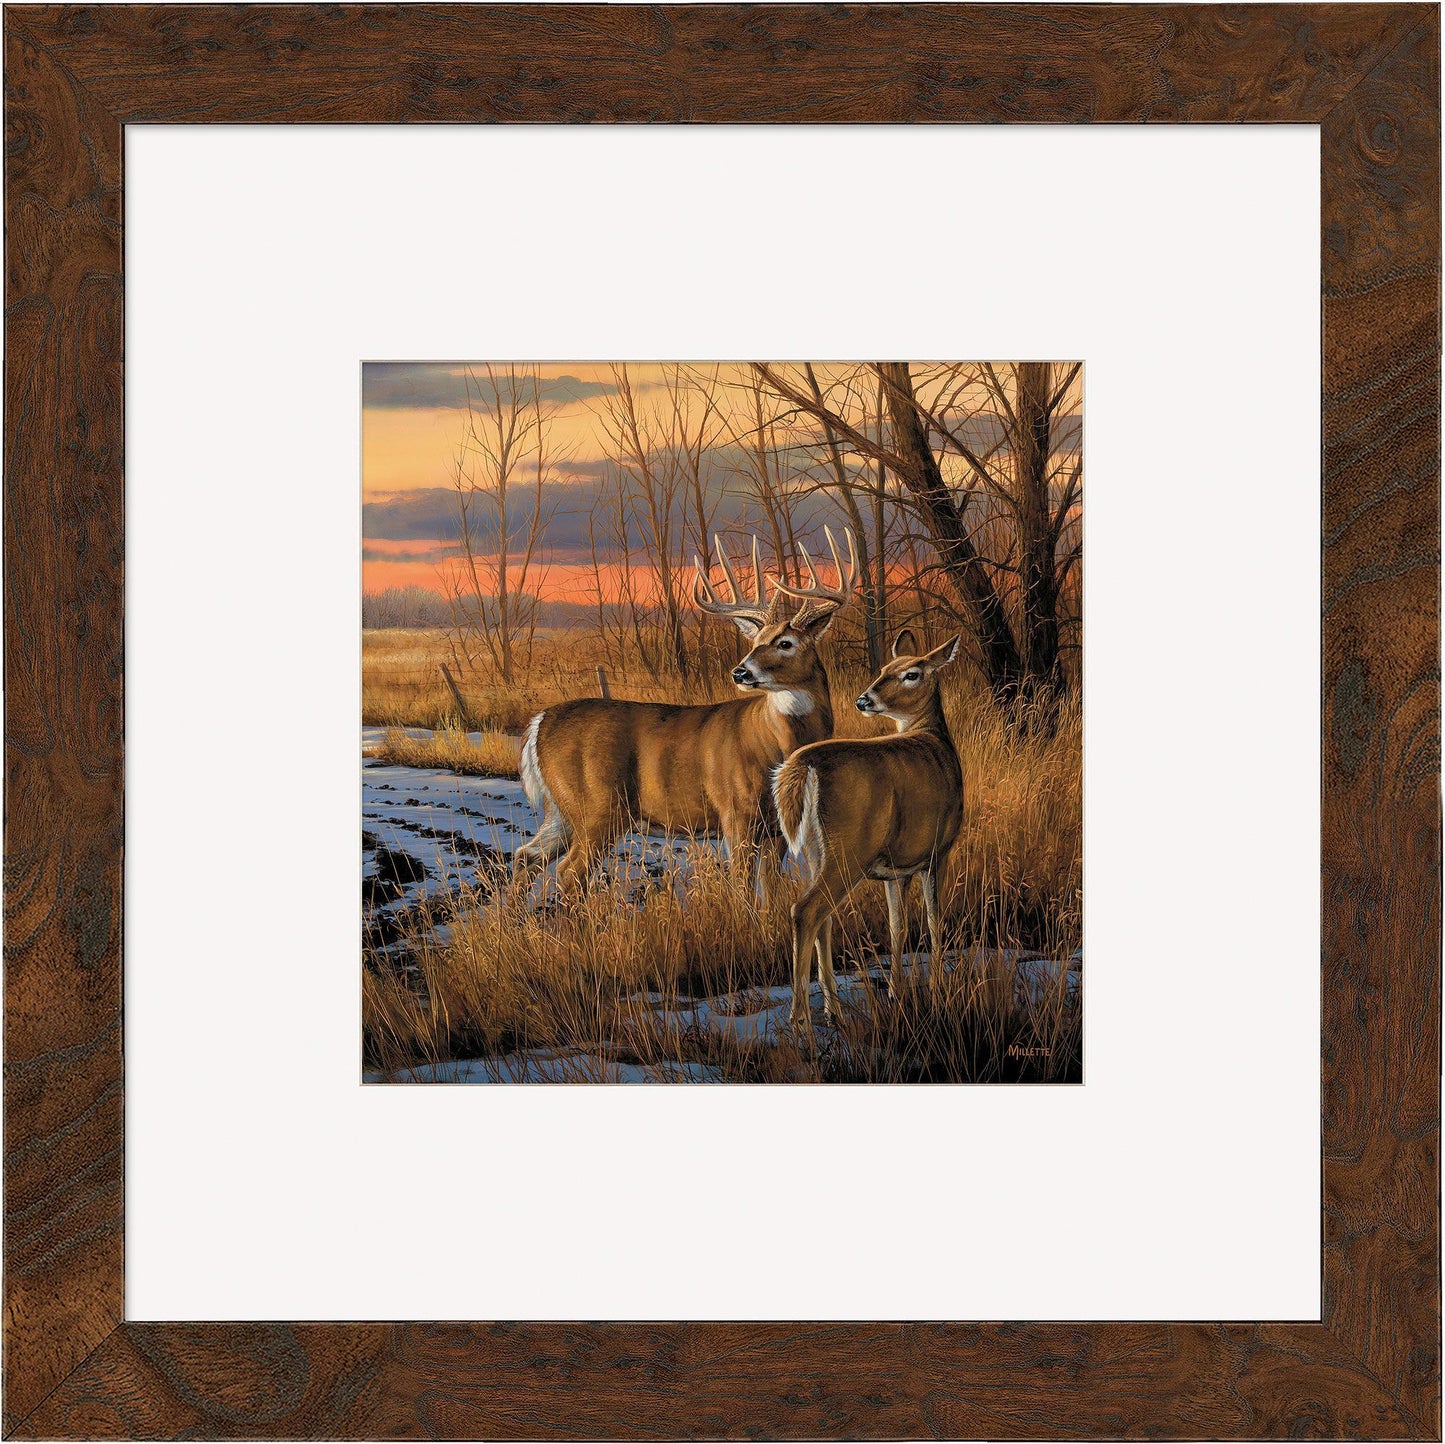 Daybreak—Whitetail Deer Contempo Square - Wild Wings